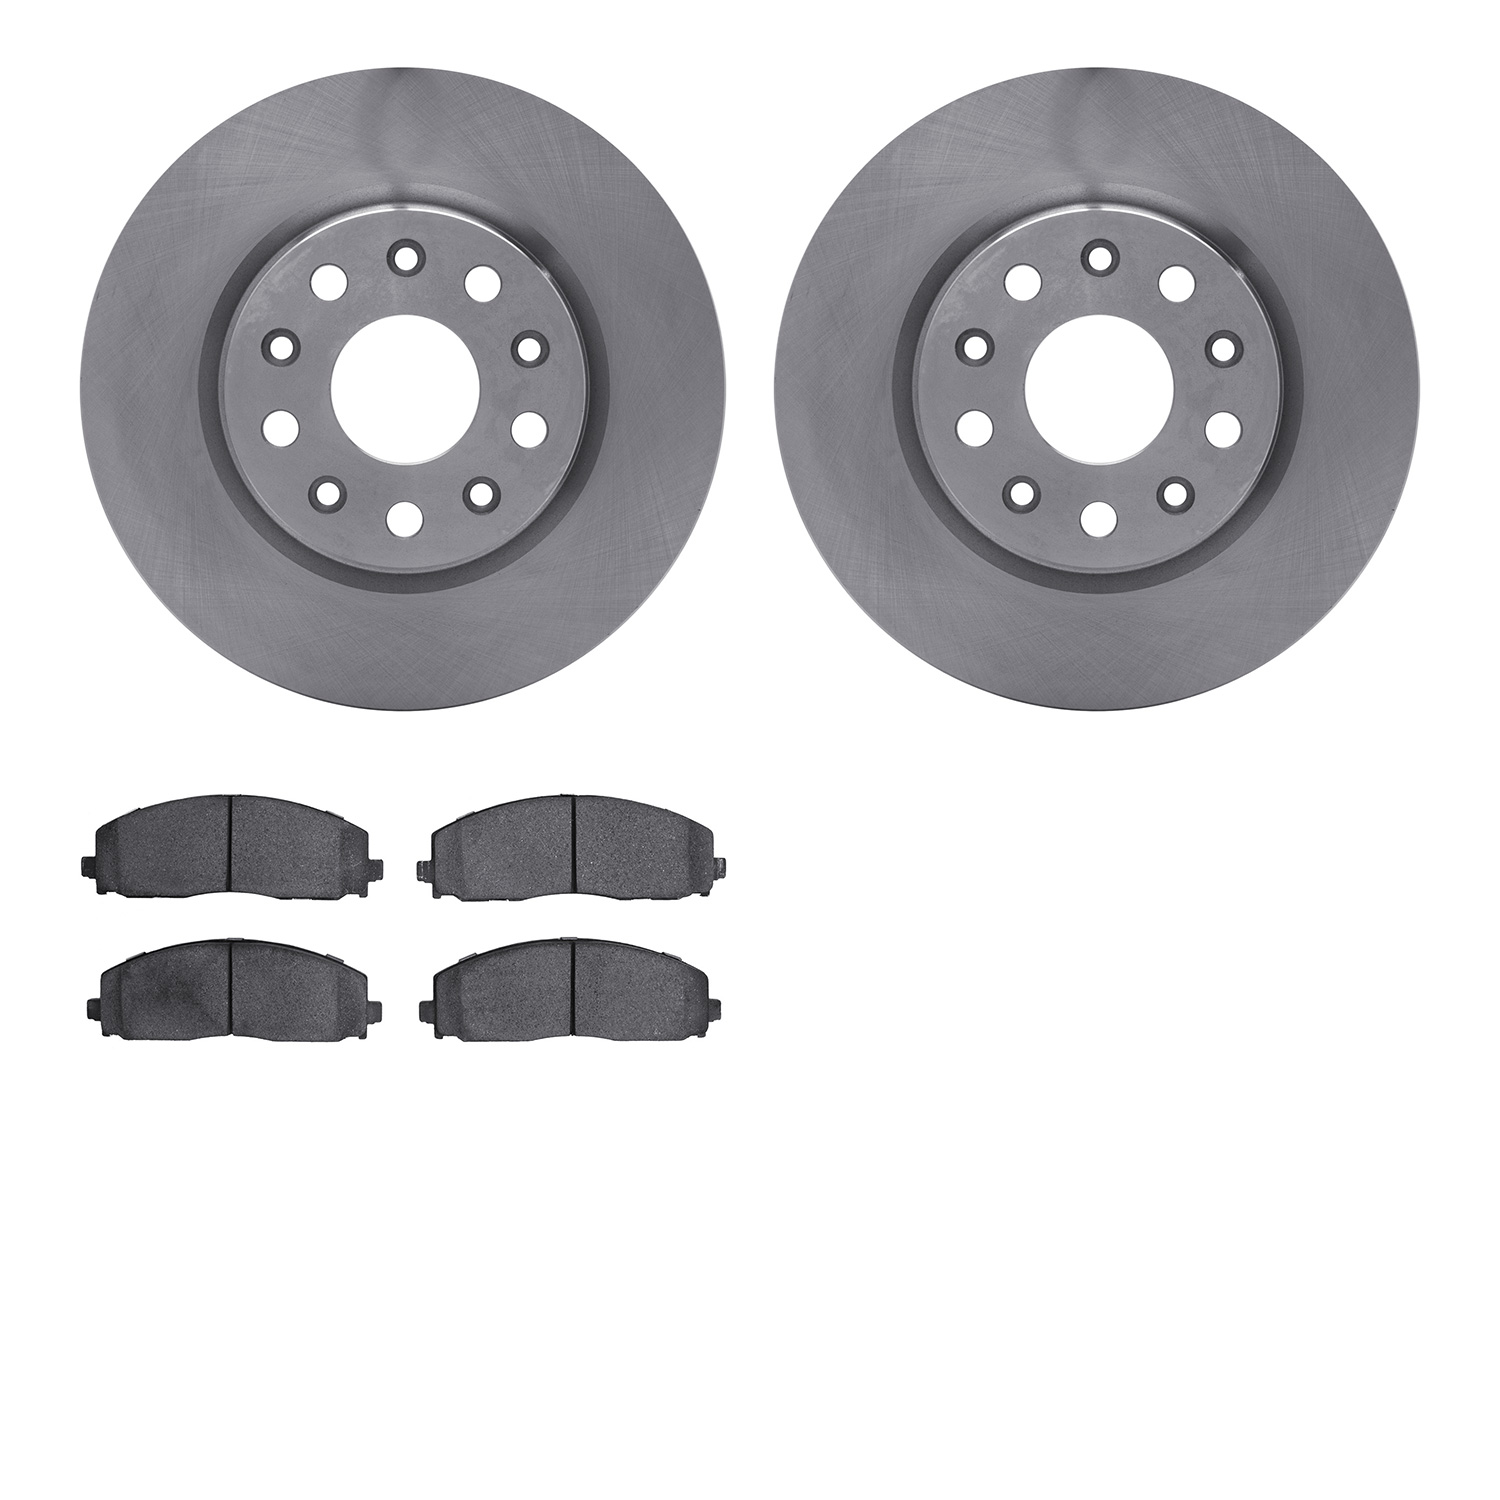 6402-42121 Brake Rotors with Ultimate-Duty Brake Pads, Fits Select Mopar, Position: Front